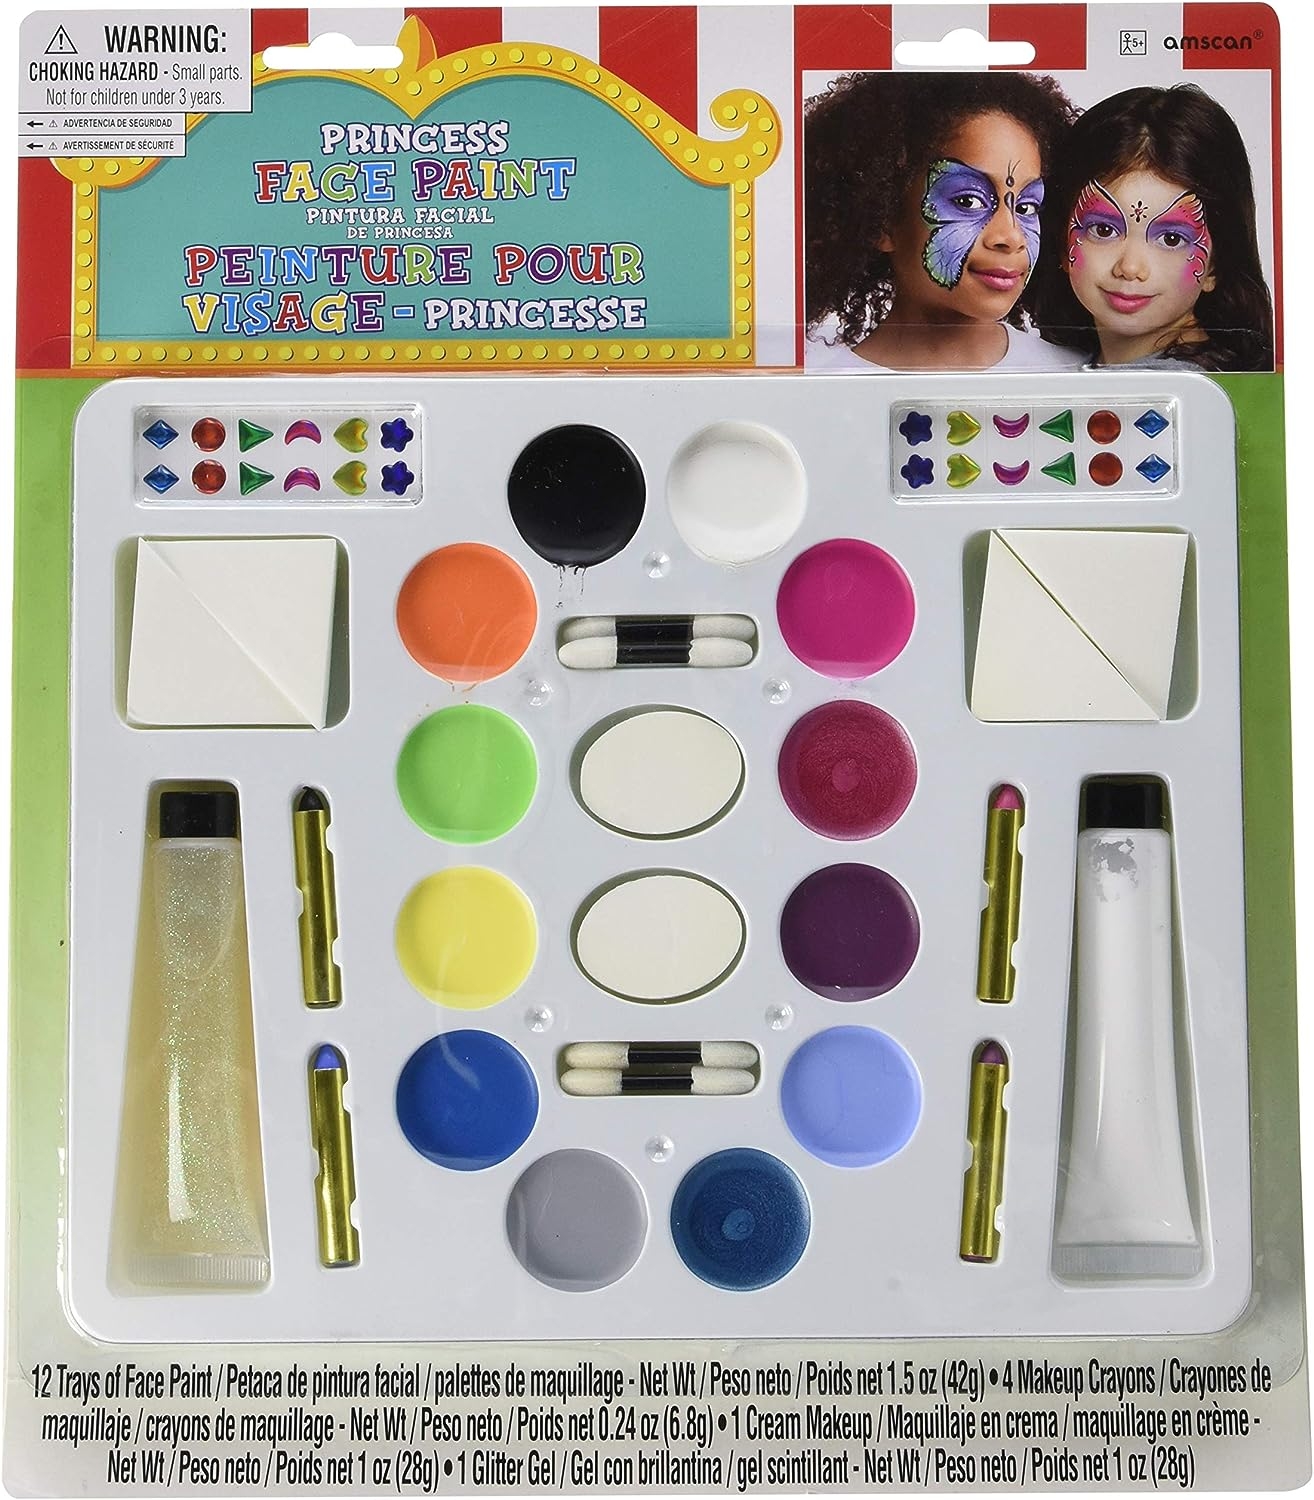 Amscan Princess Face and Body Paint Kit Deluxe – 1 Pc., Game collection   price checker   price checker Description Gallery